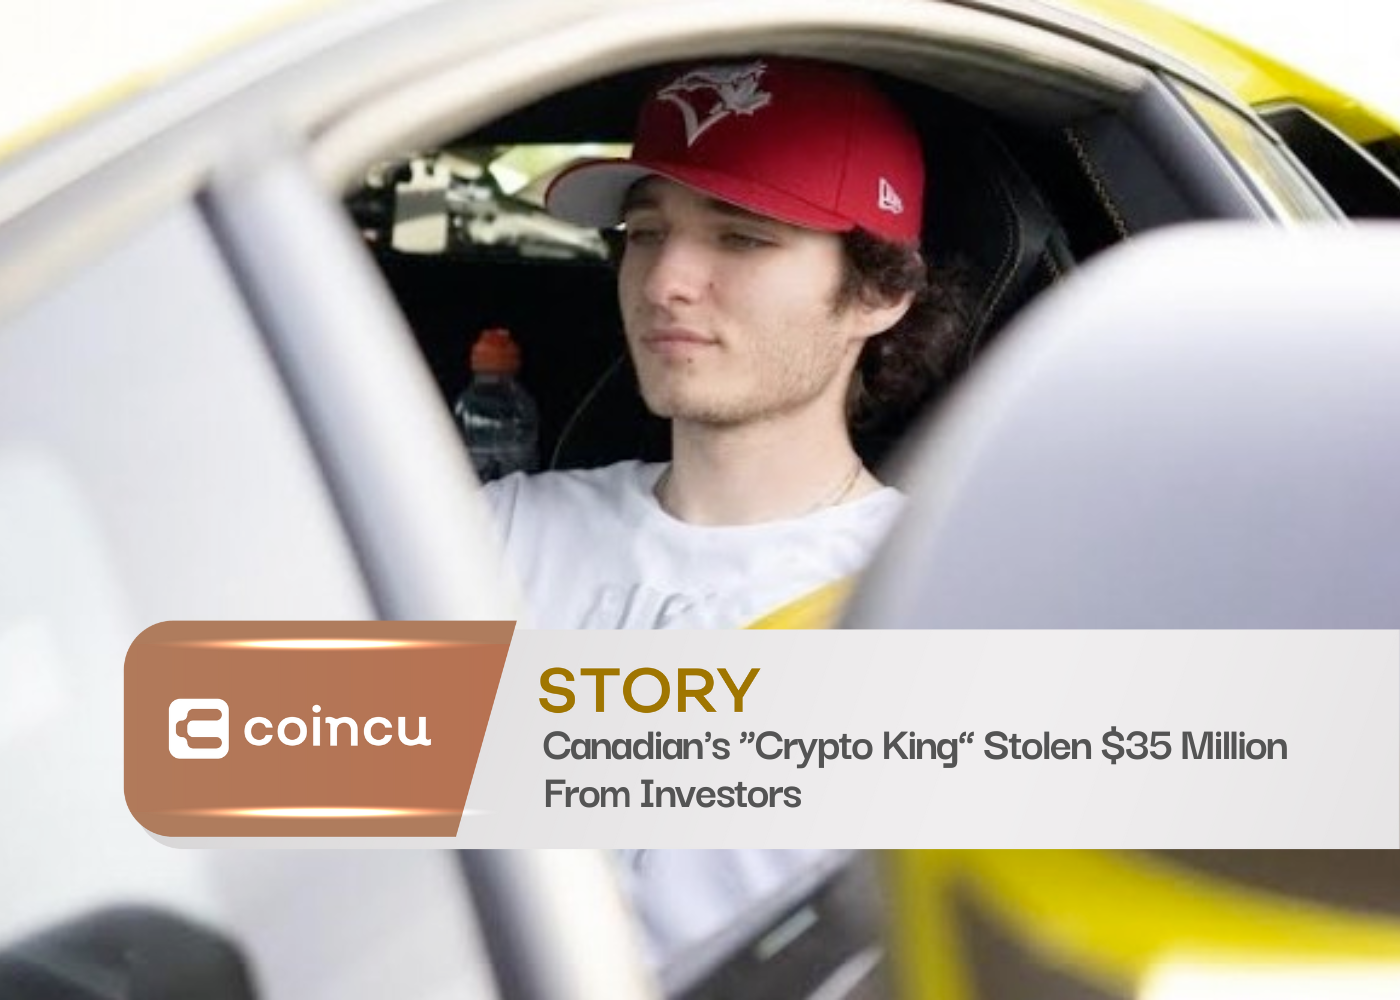 Canadian's “Crypto King” Stolen $35 Million From Investors